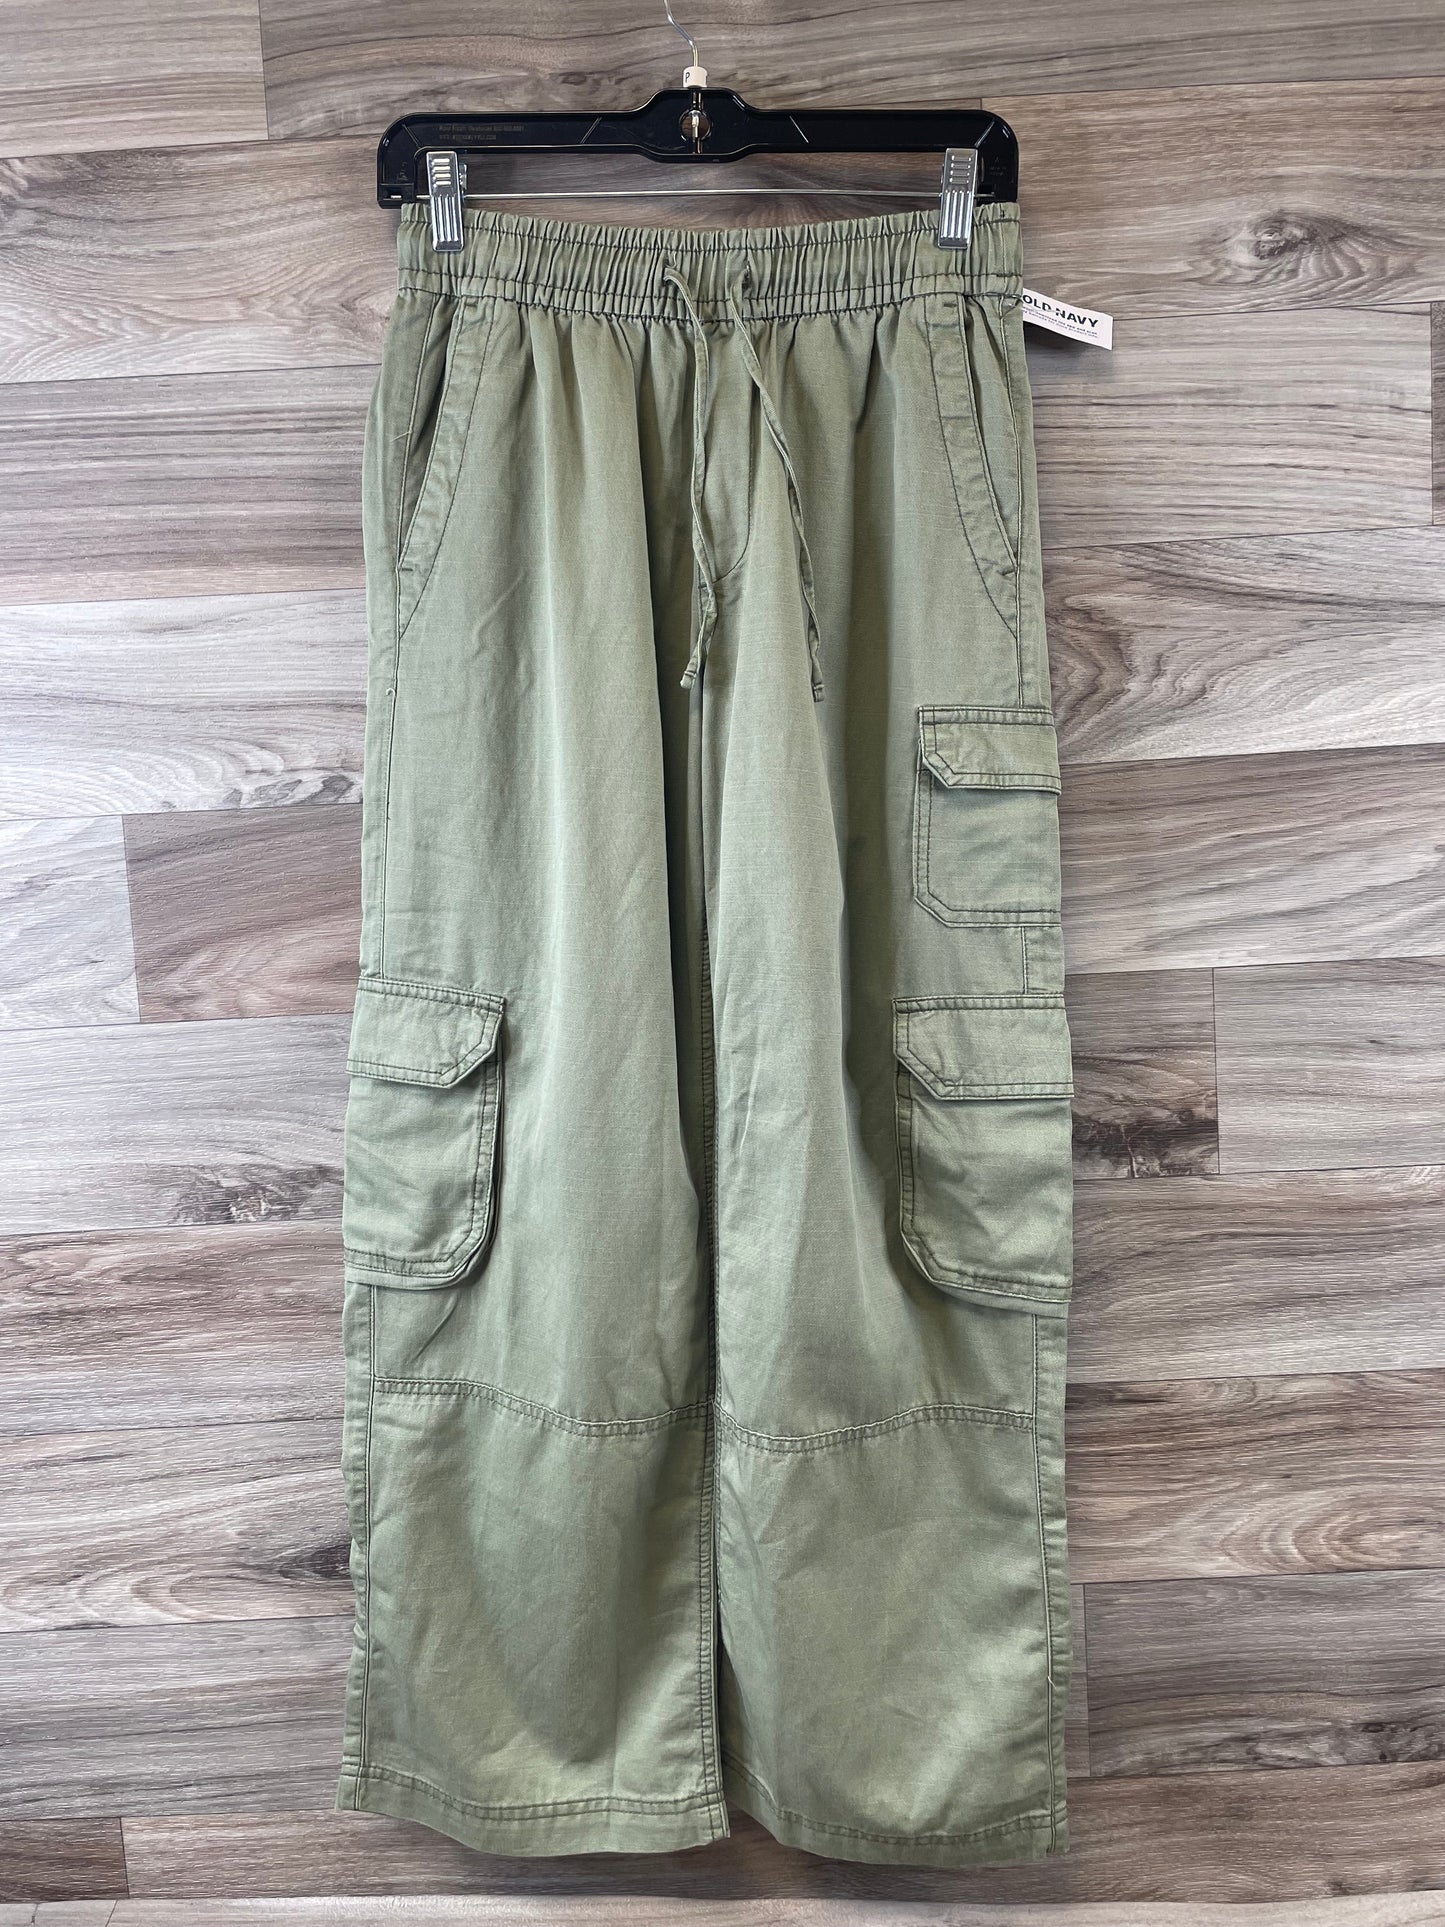 Green Pants Cargo & Utility Old Navy, Size 2